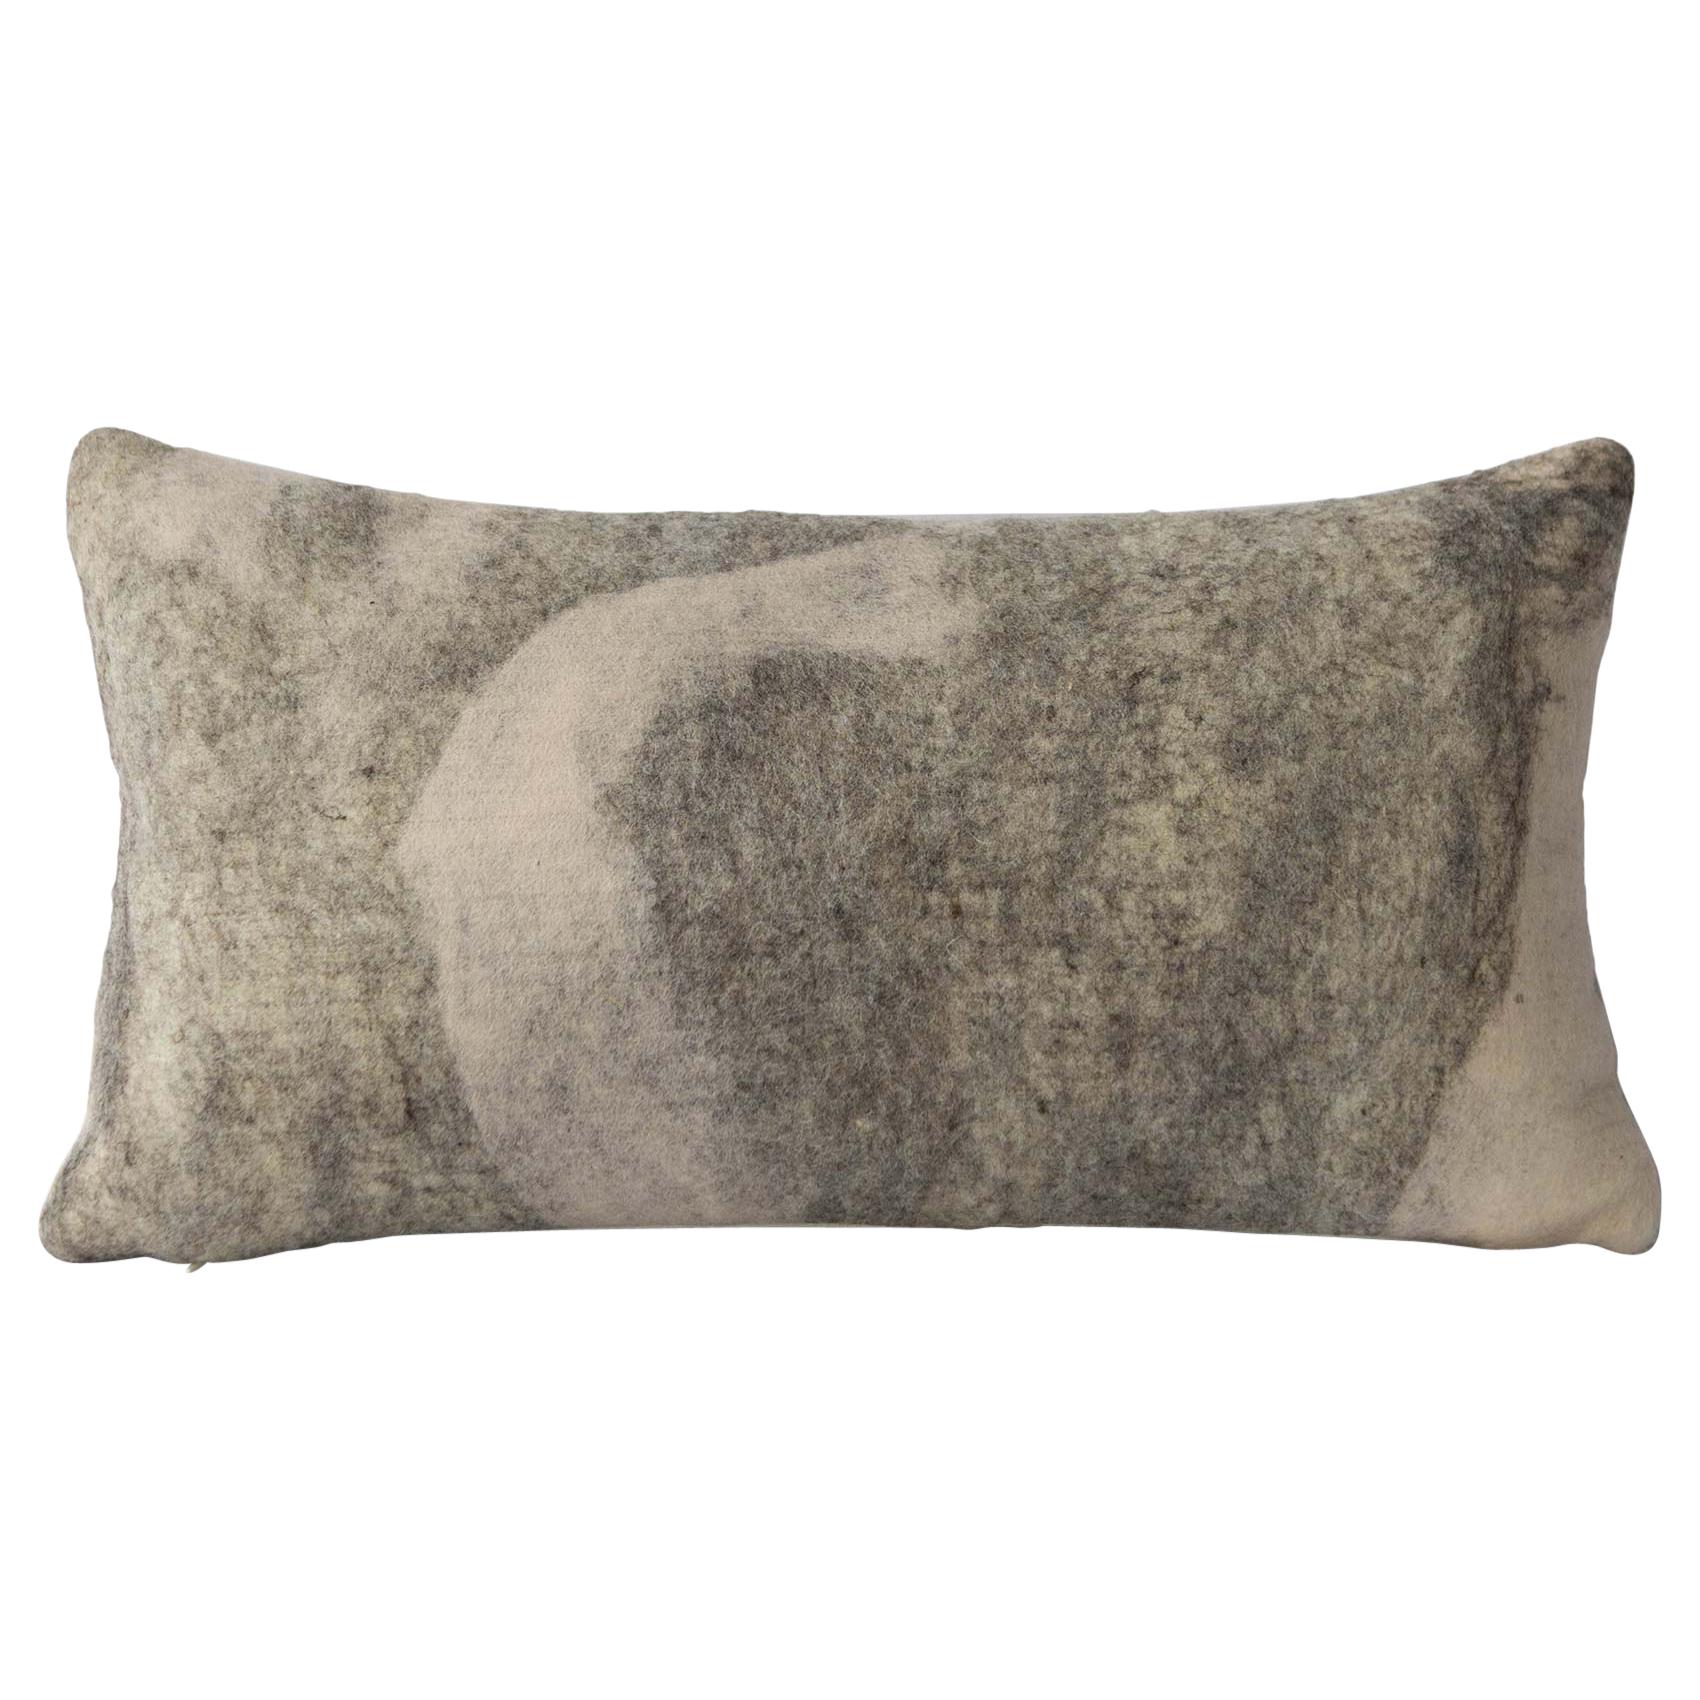 Shetland Wool Rose Pillow, Small - Heritage Sheep Collection